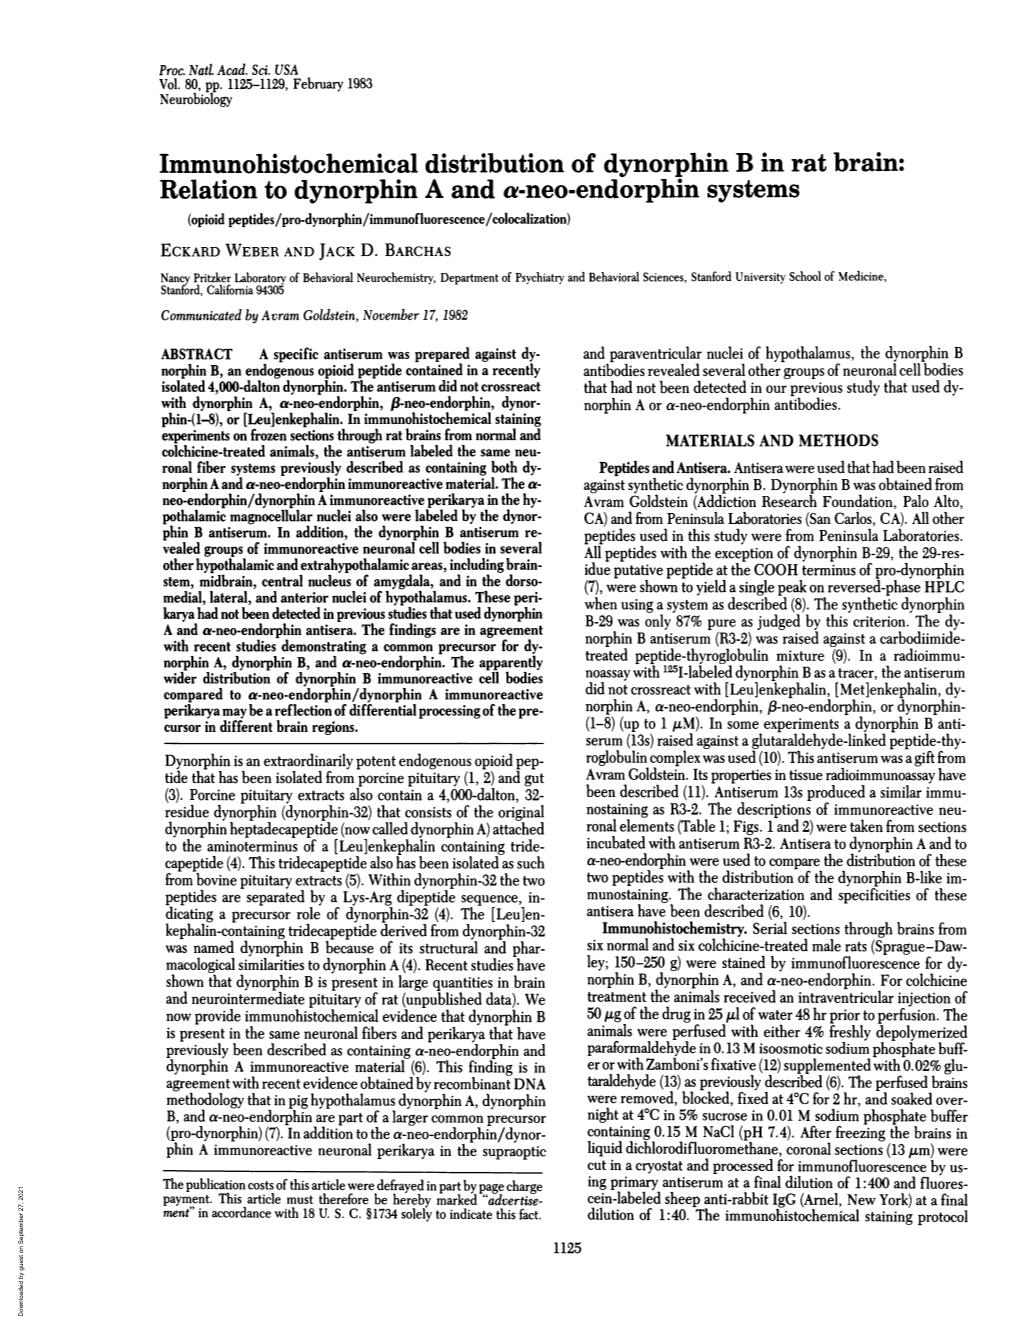 Relation to Dynorphin a and A-Neo-Endorphin Systems (Opioid Peptides/Pro-Dynorphin/Immunofluorescence/Colocalization) ECKARD WEBER and JACK D